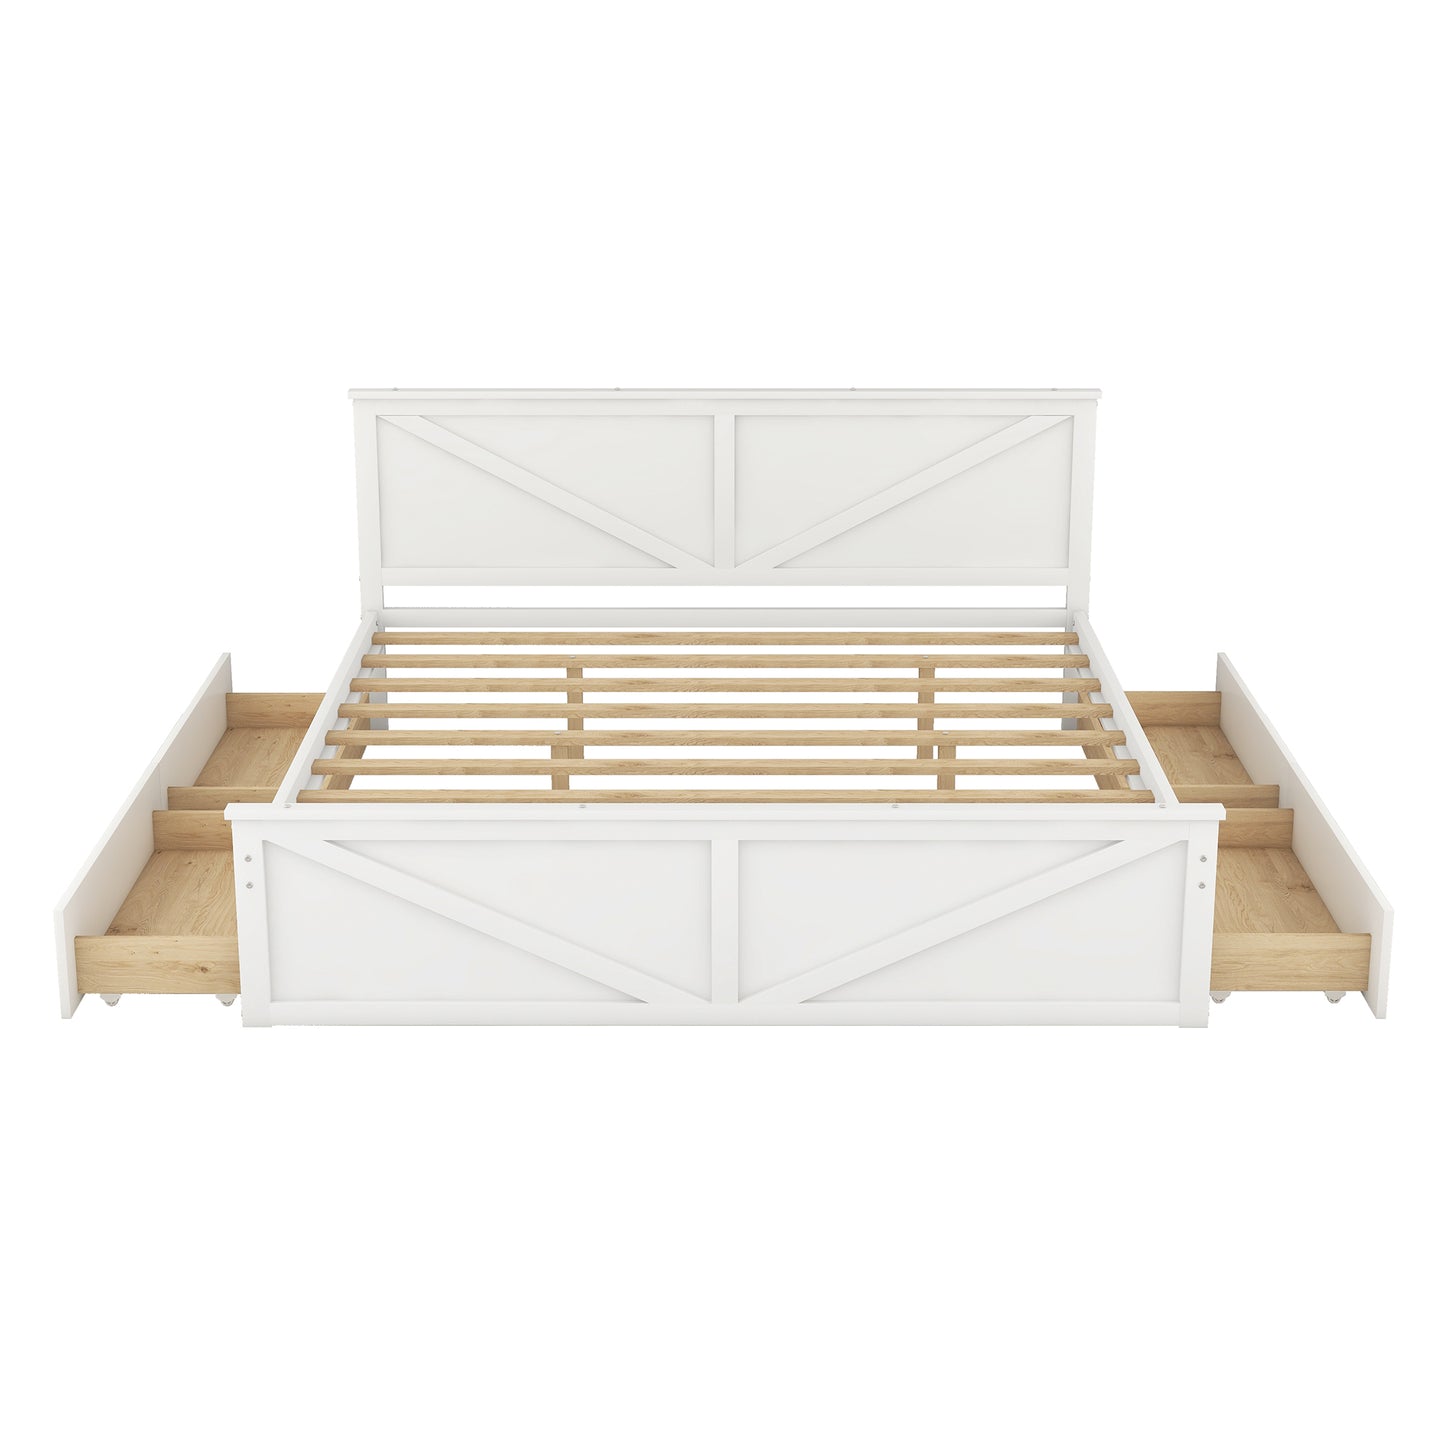 King Size Wooden Platform Bed with Four Storage Drawers and Support Legs, White